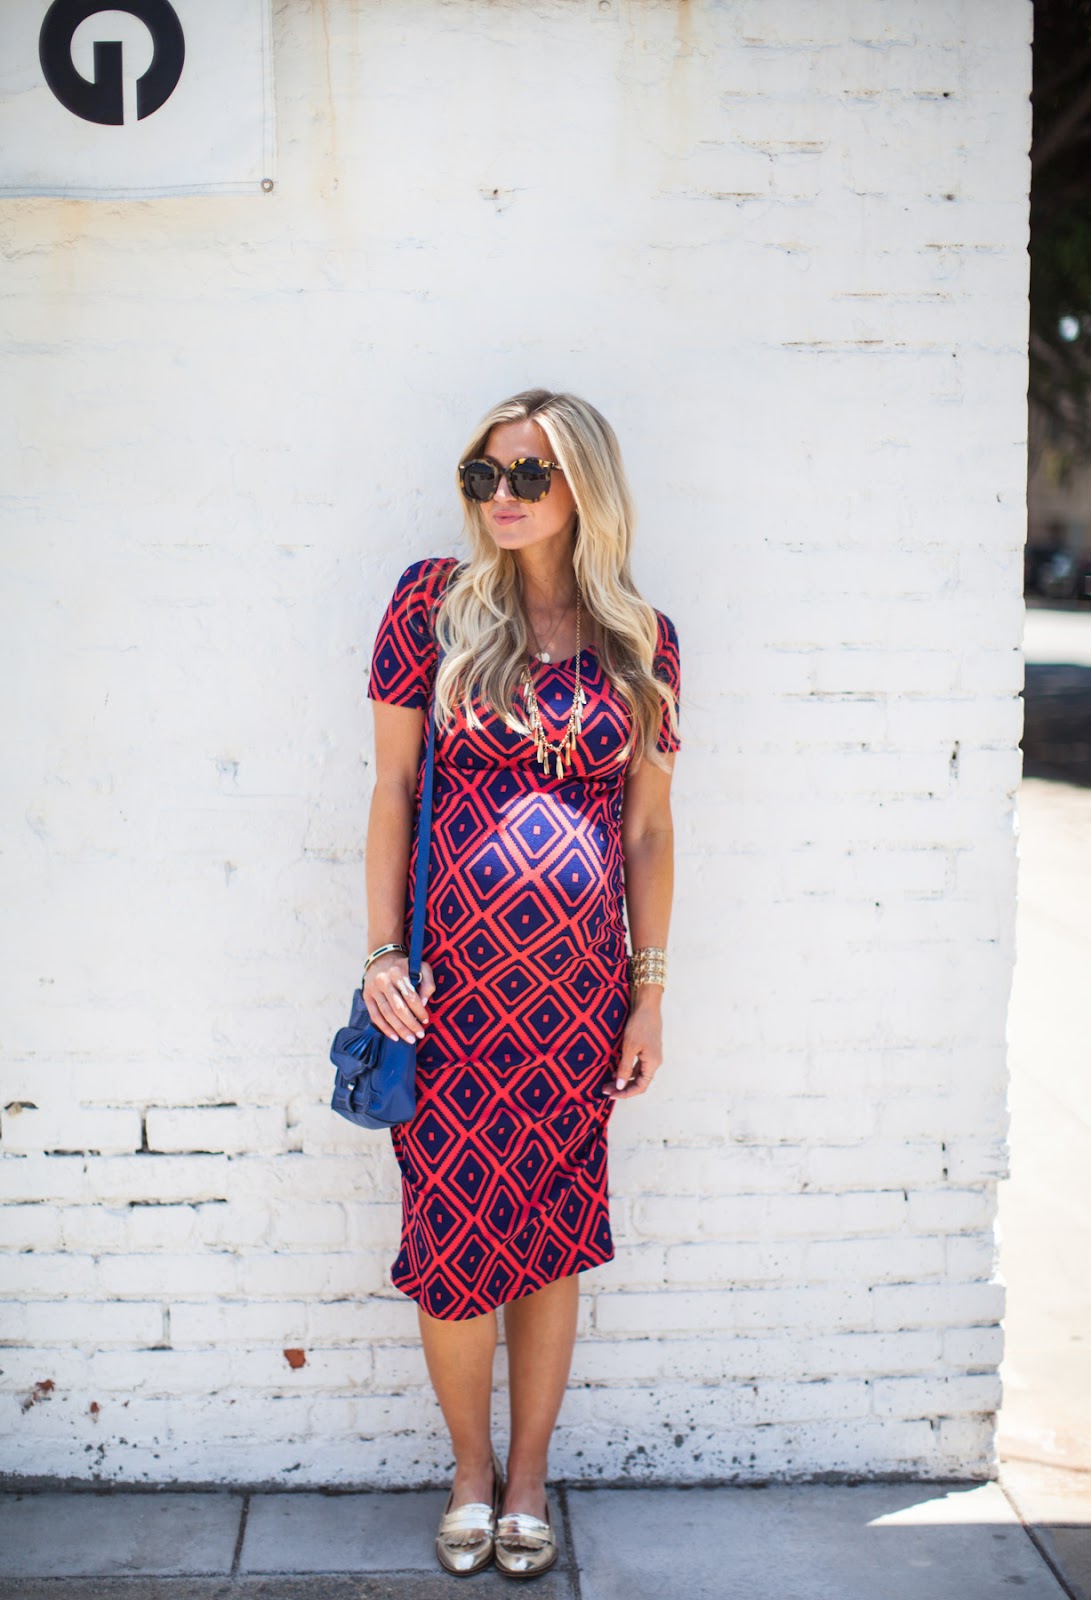 Elle Apparel: FOURTH OF JULY RUCHED MATERNITY DRESS TUTORIAL